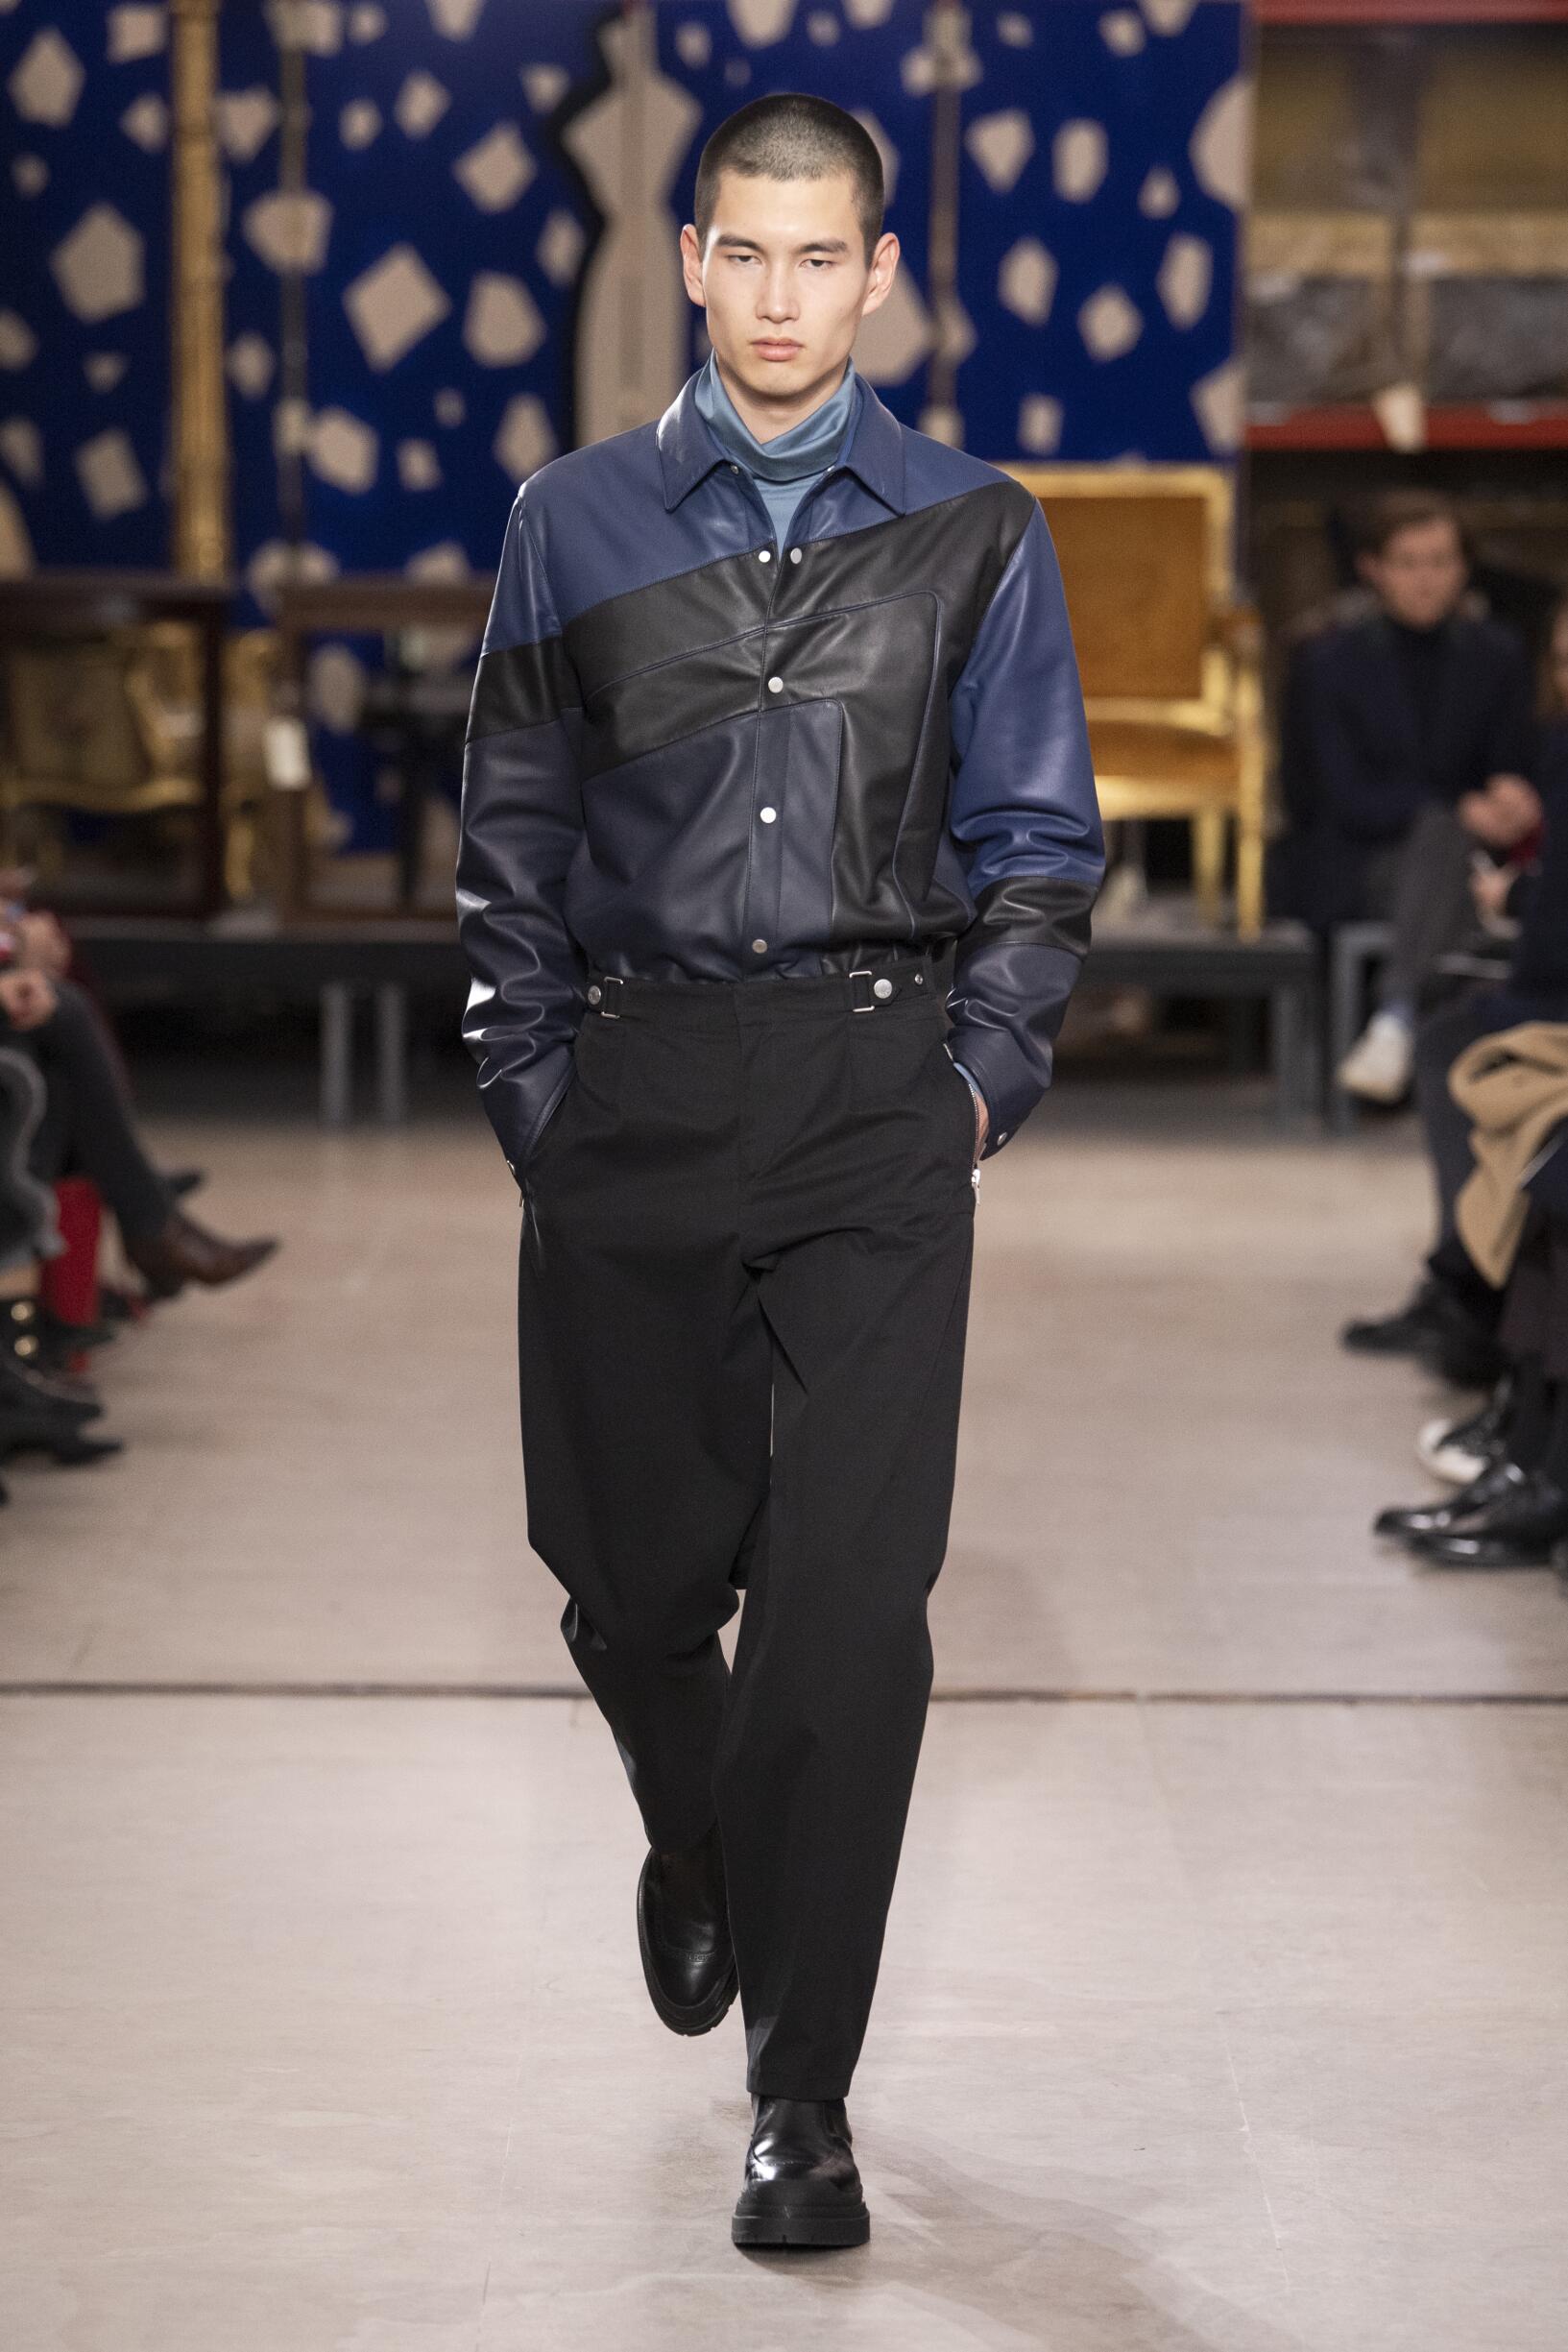 HERMÈS FALL WINTER 2019 MEN’S COLLECTION | The Skinny Beep